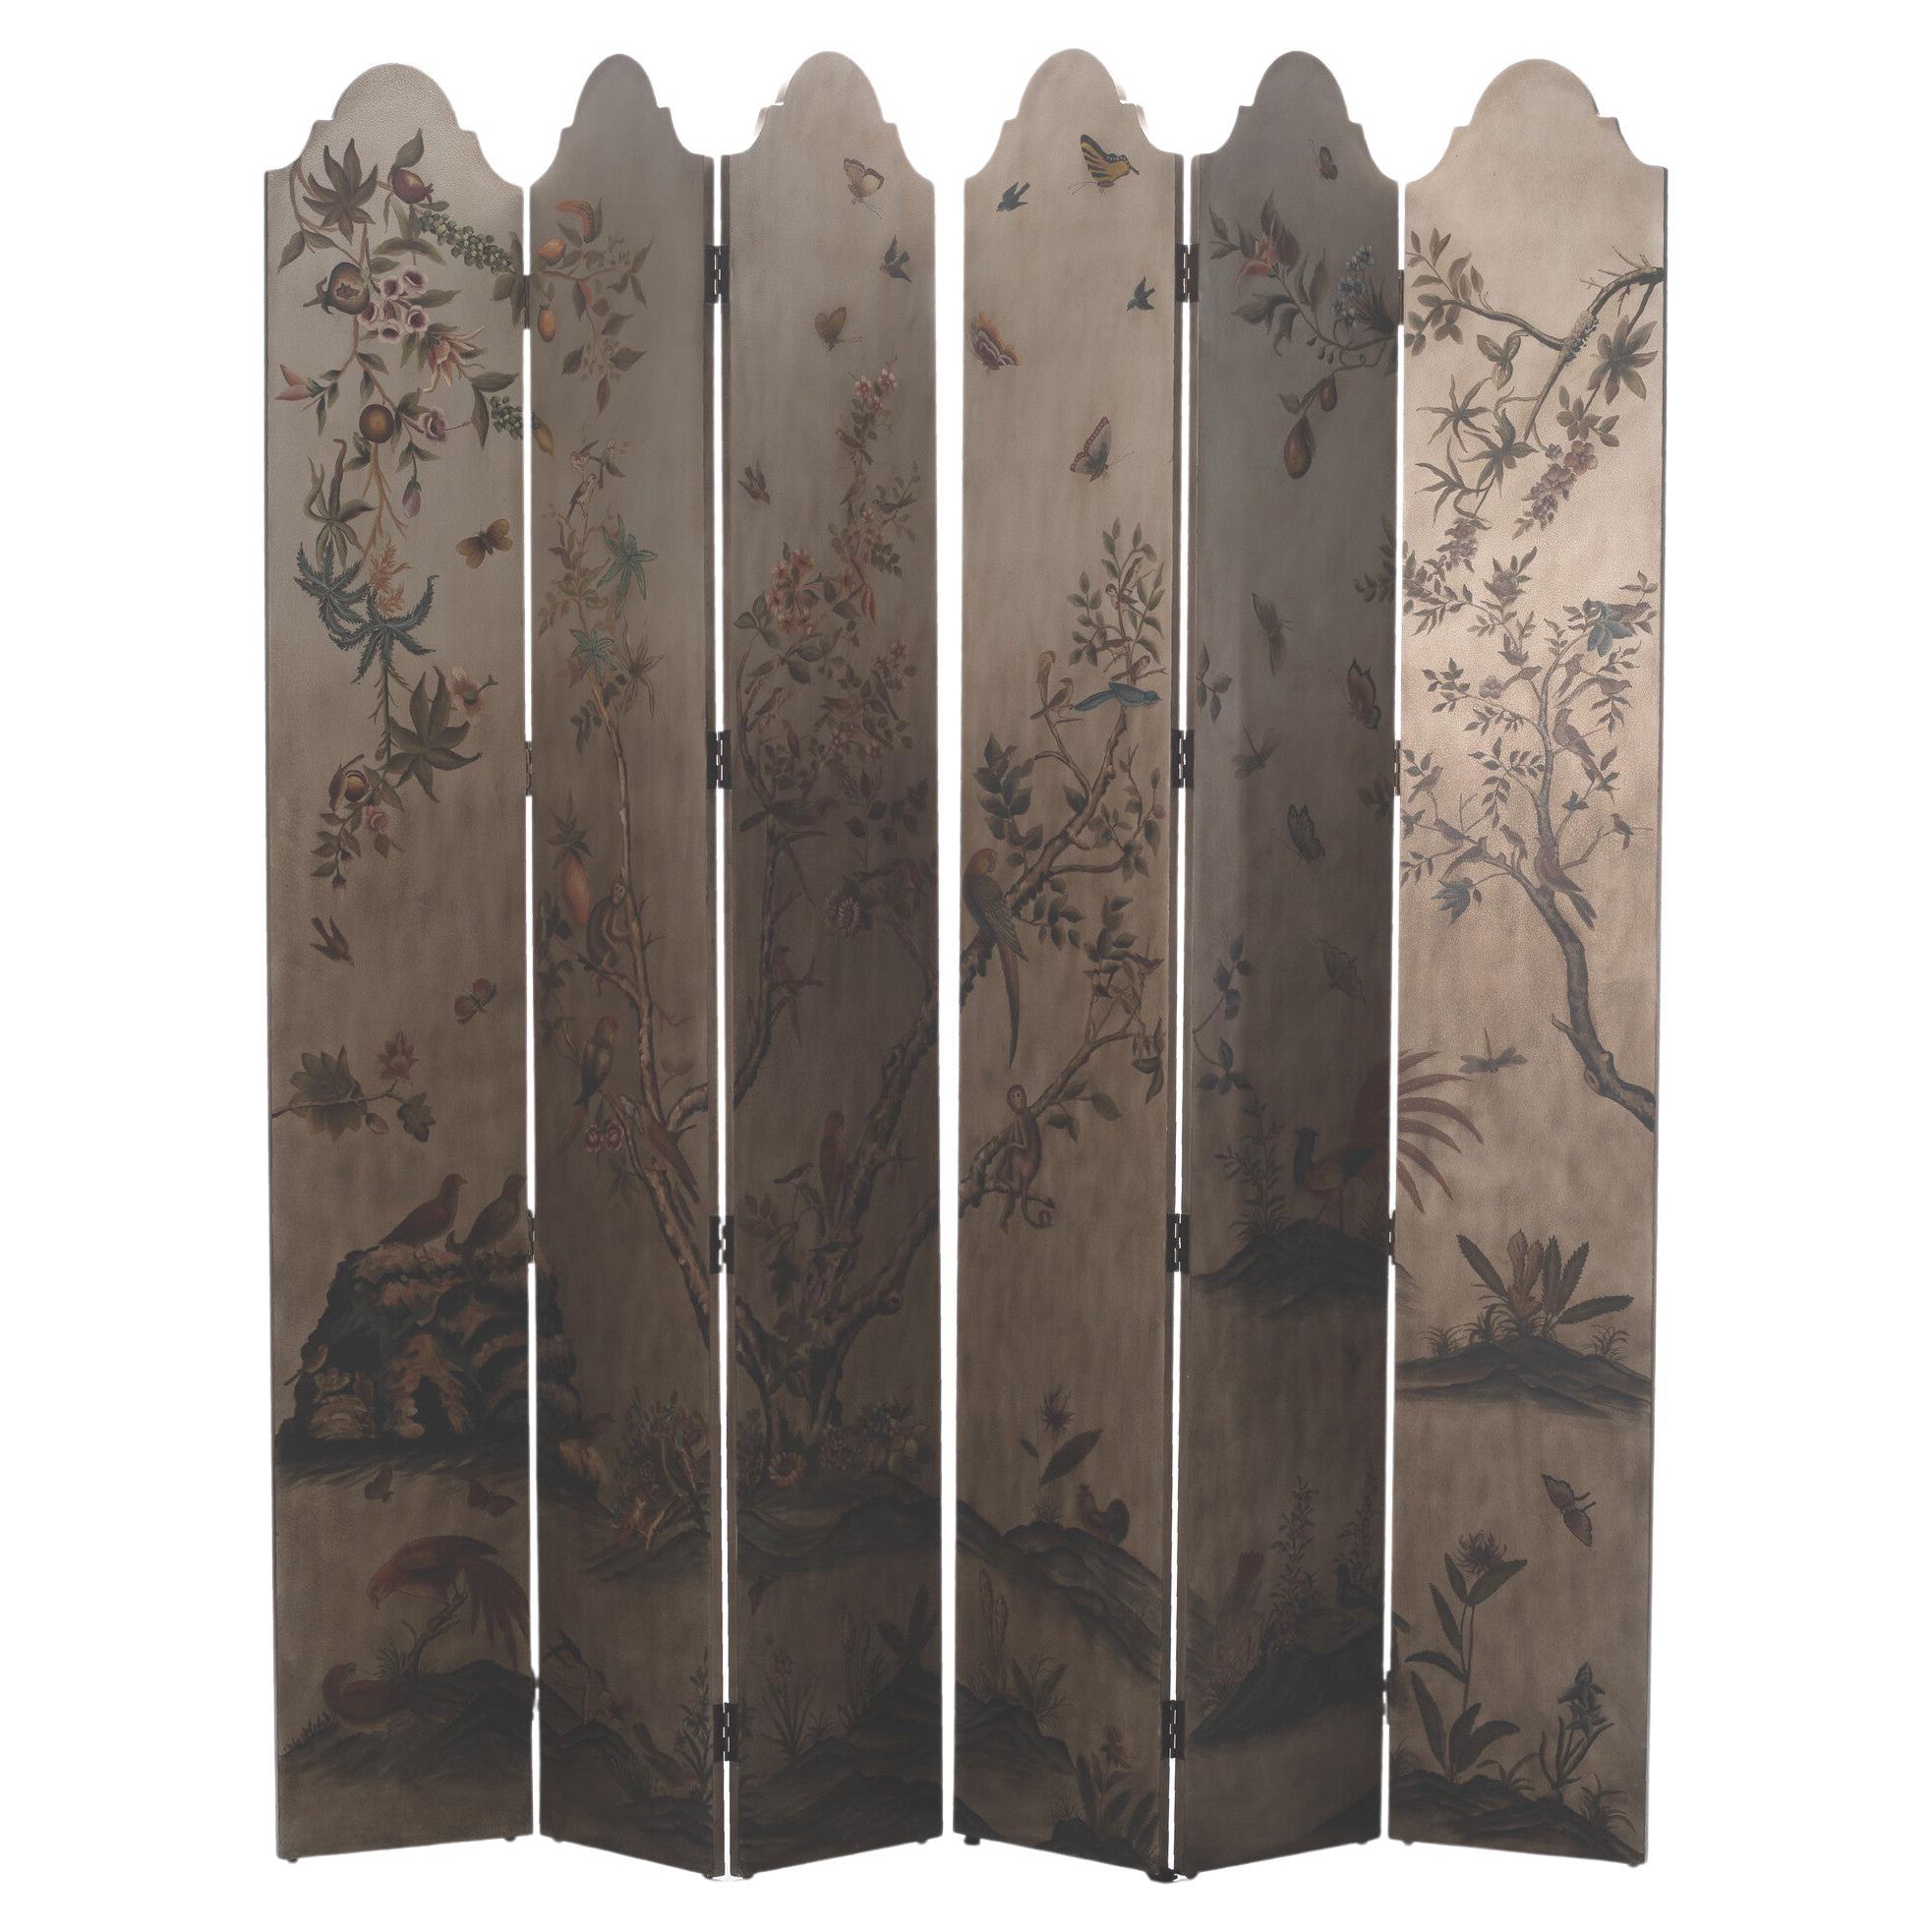 Vintage six panel chinoiserie floral folding screen. A lovely floral silvery scene with foliage, birds and butterflies.